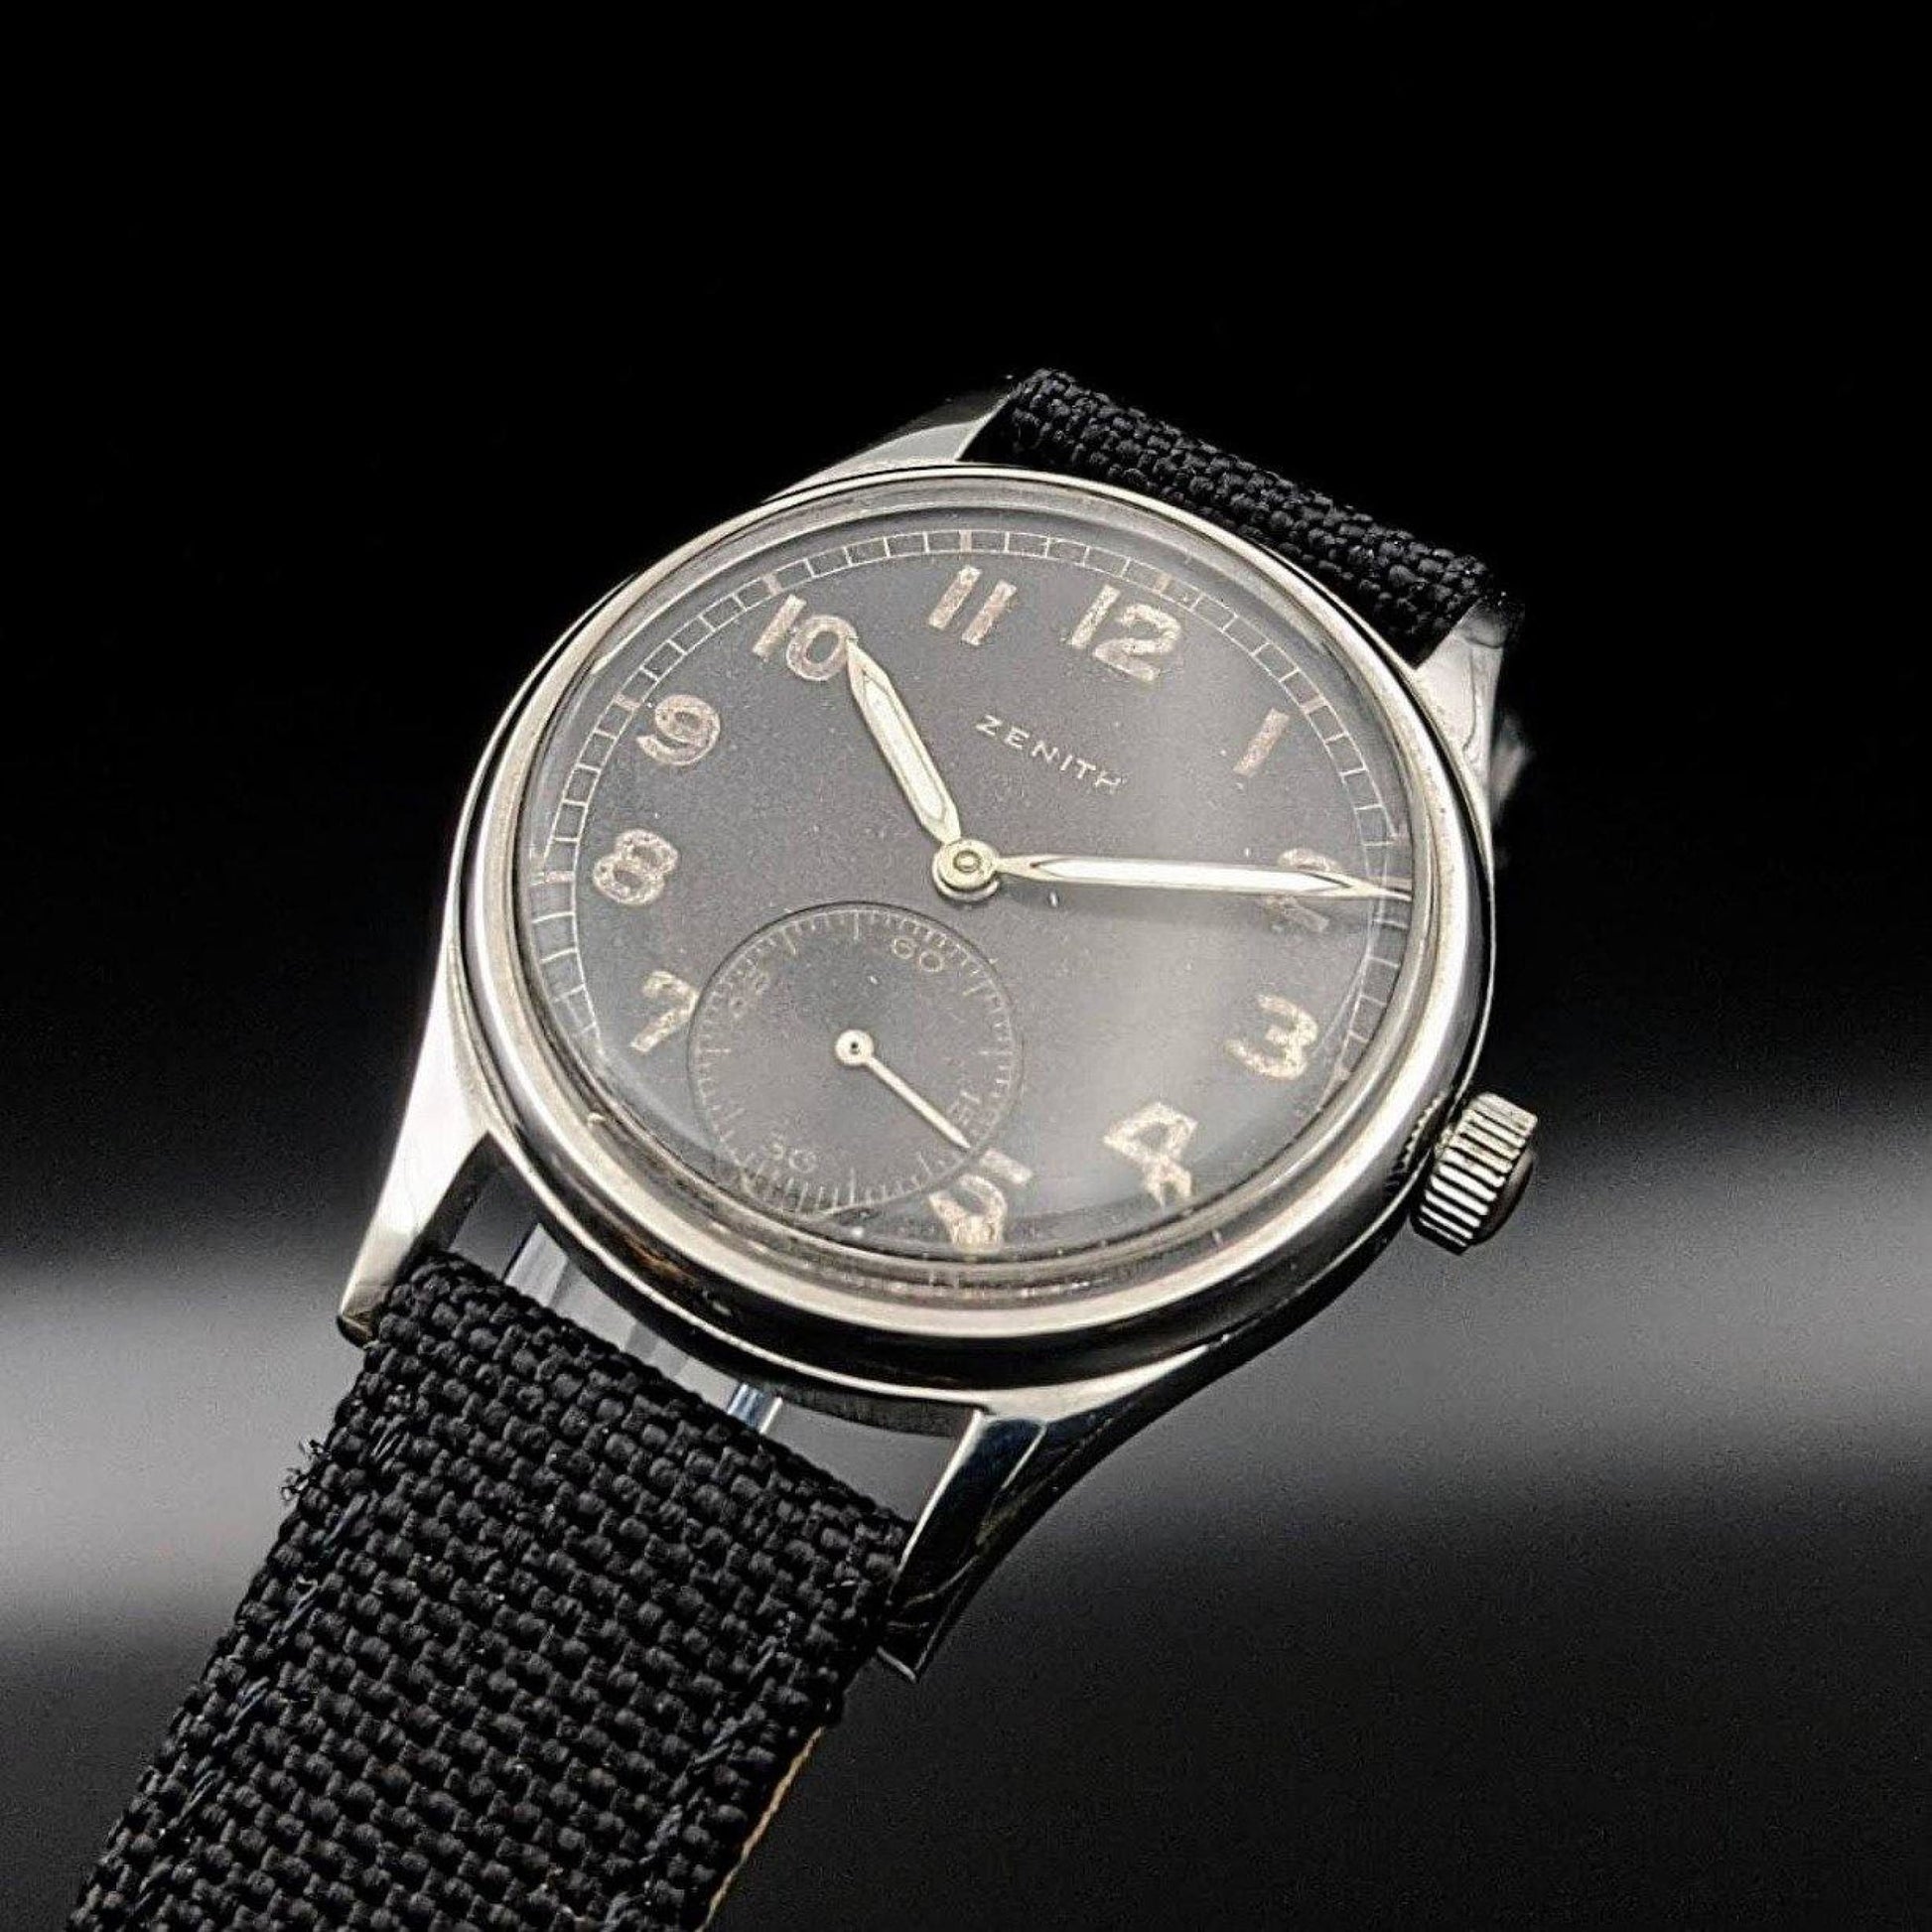 Zenith DH German Military Wermacht WWII / Vintage 1942 / Serviced - E-V-W.com